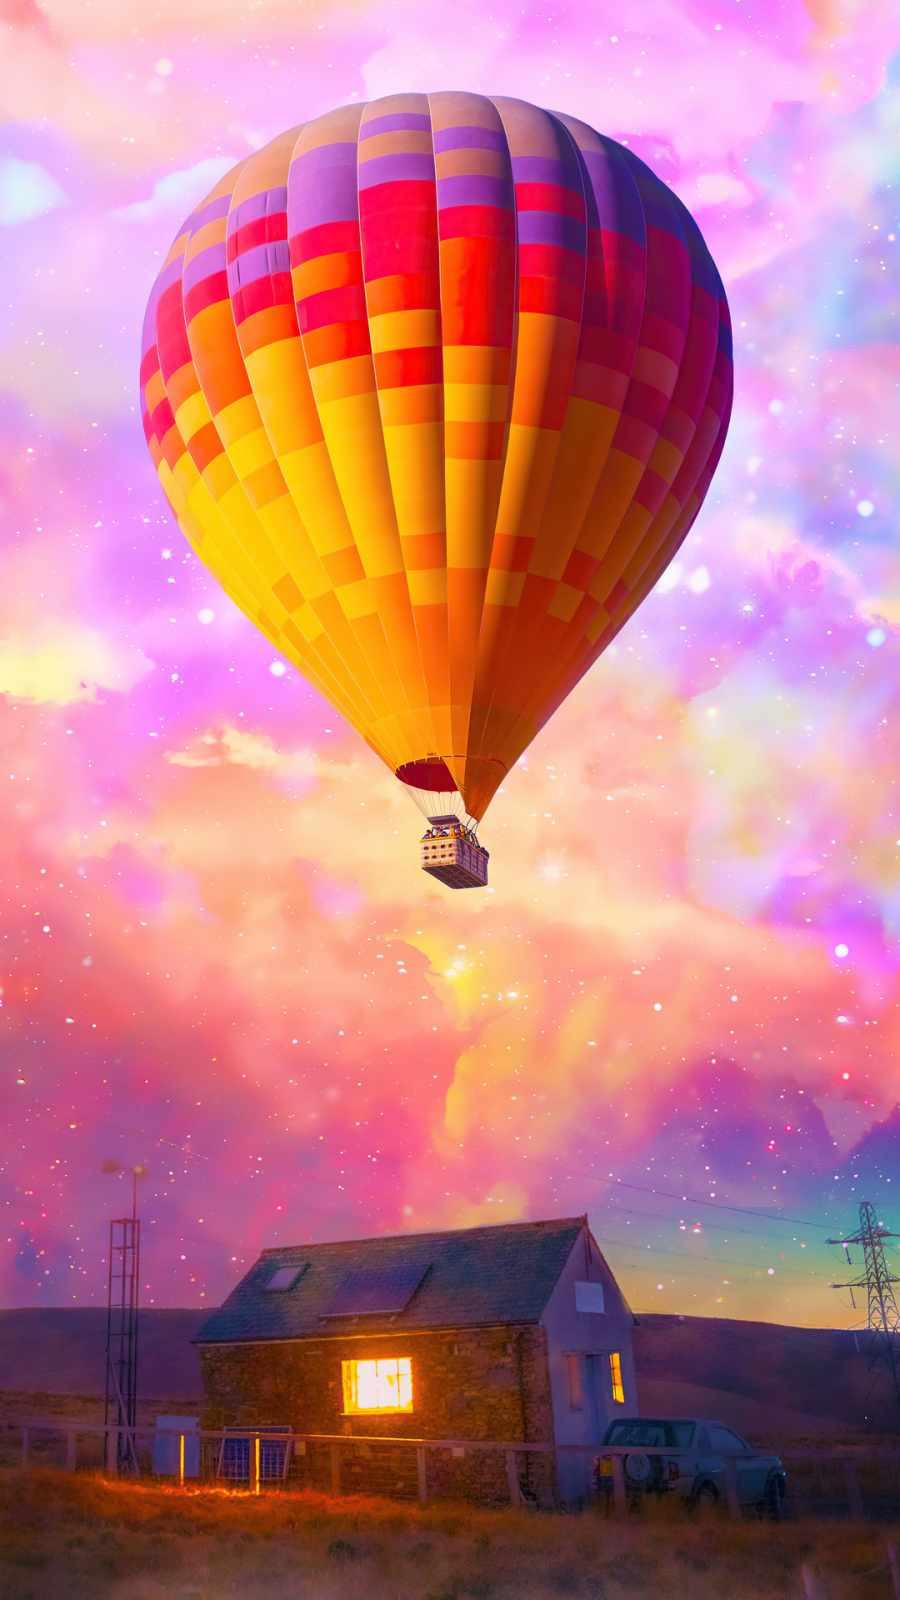 Hot Air Balloon Flying IPhone Wallpaper  IPhone Wallpapers